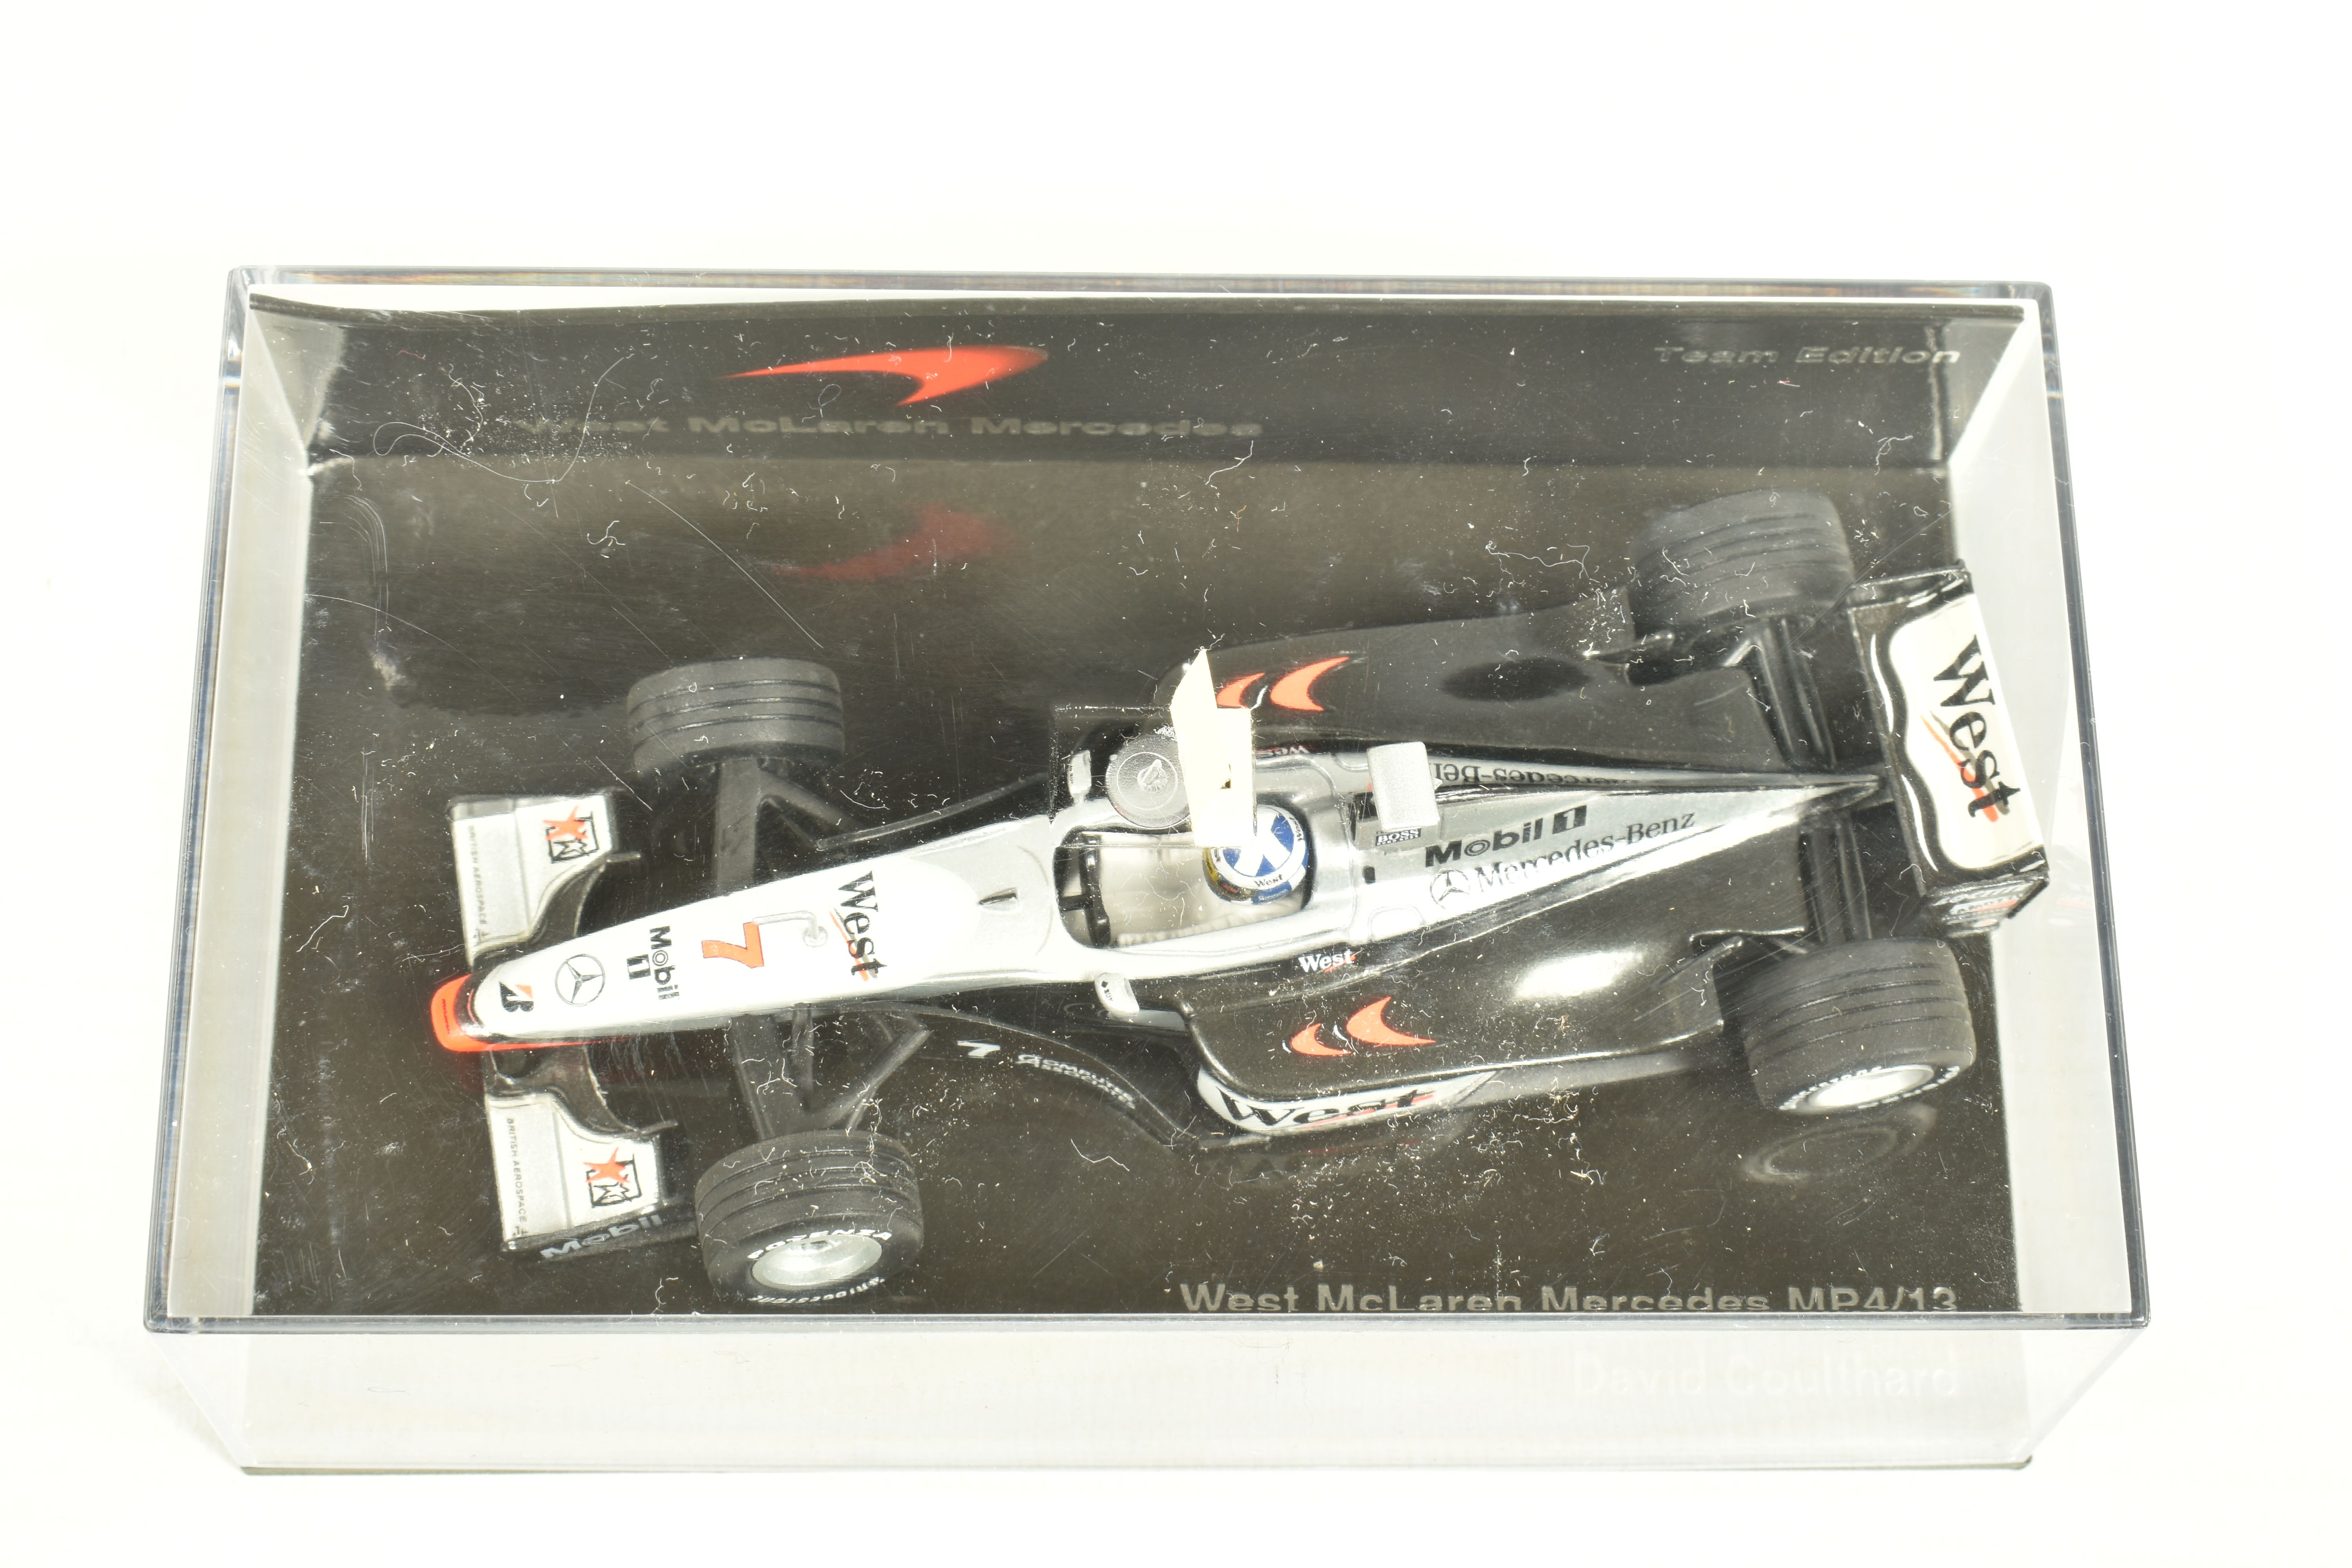 SEVEN MINICHAMP 1.43 SCALE DIECAST MODELS, to include a Williams F1 BMW RW26 JP Montoya, model no. - Image 16 of 16